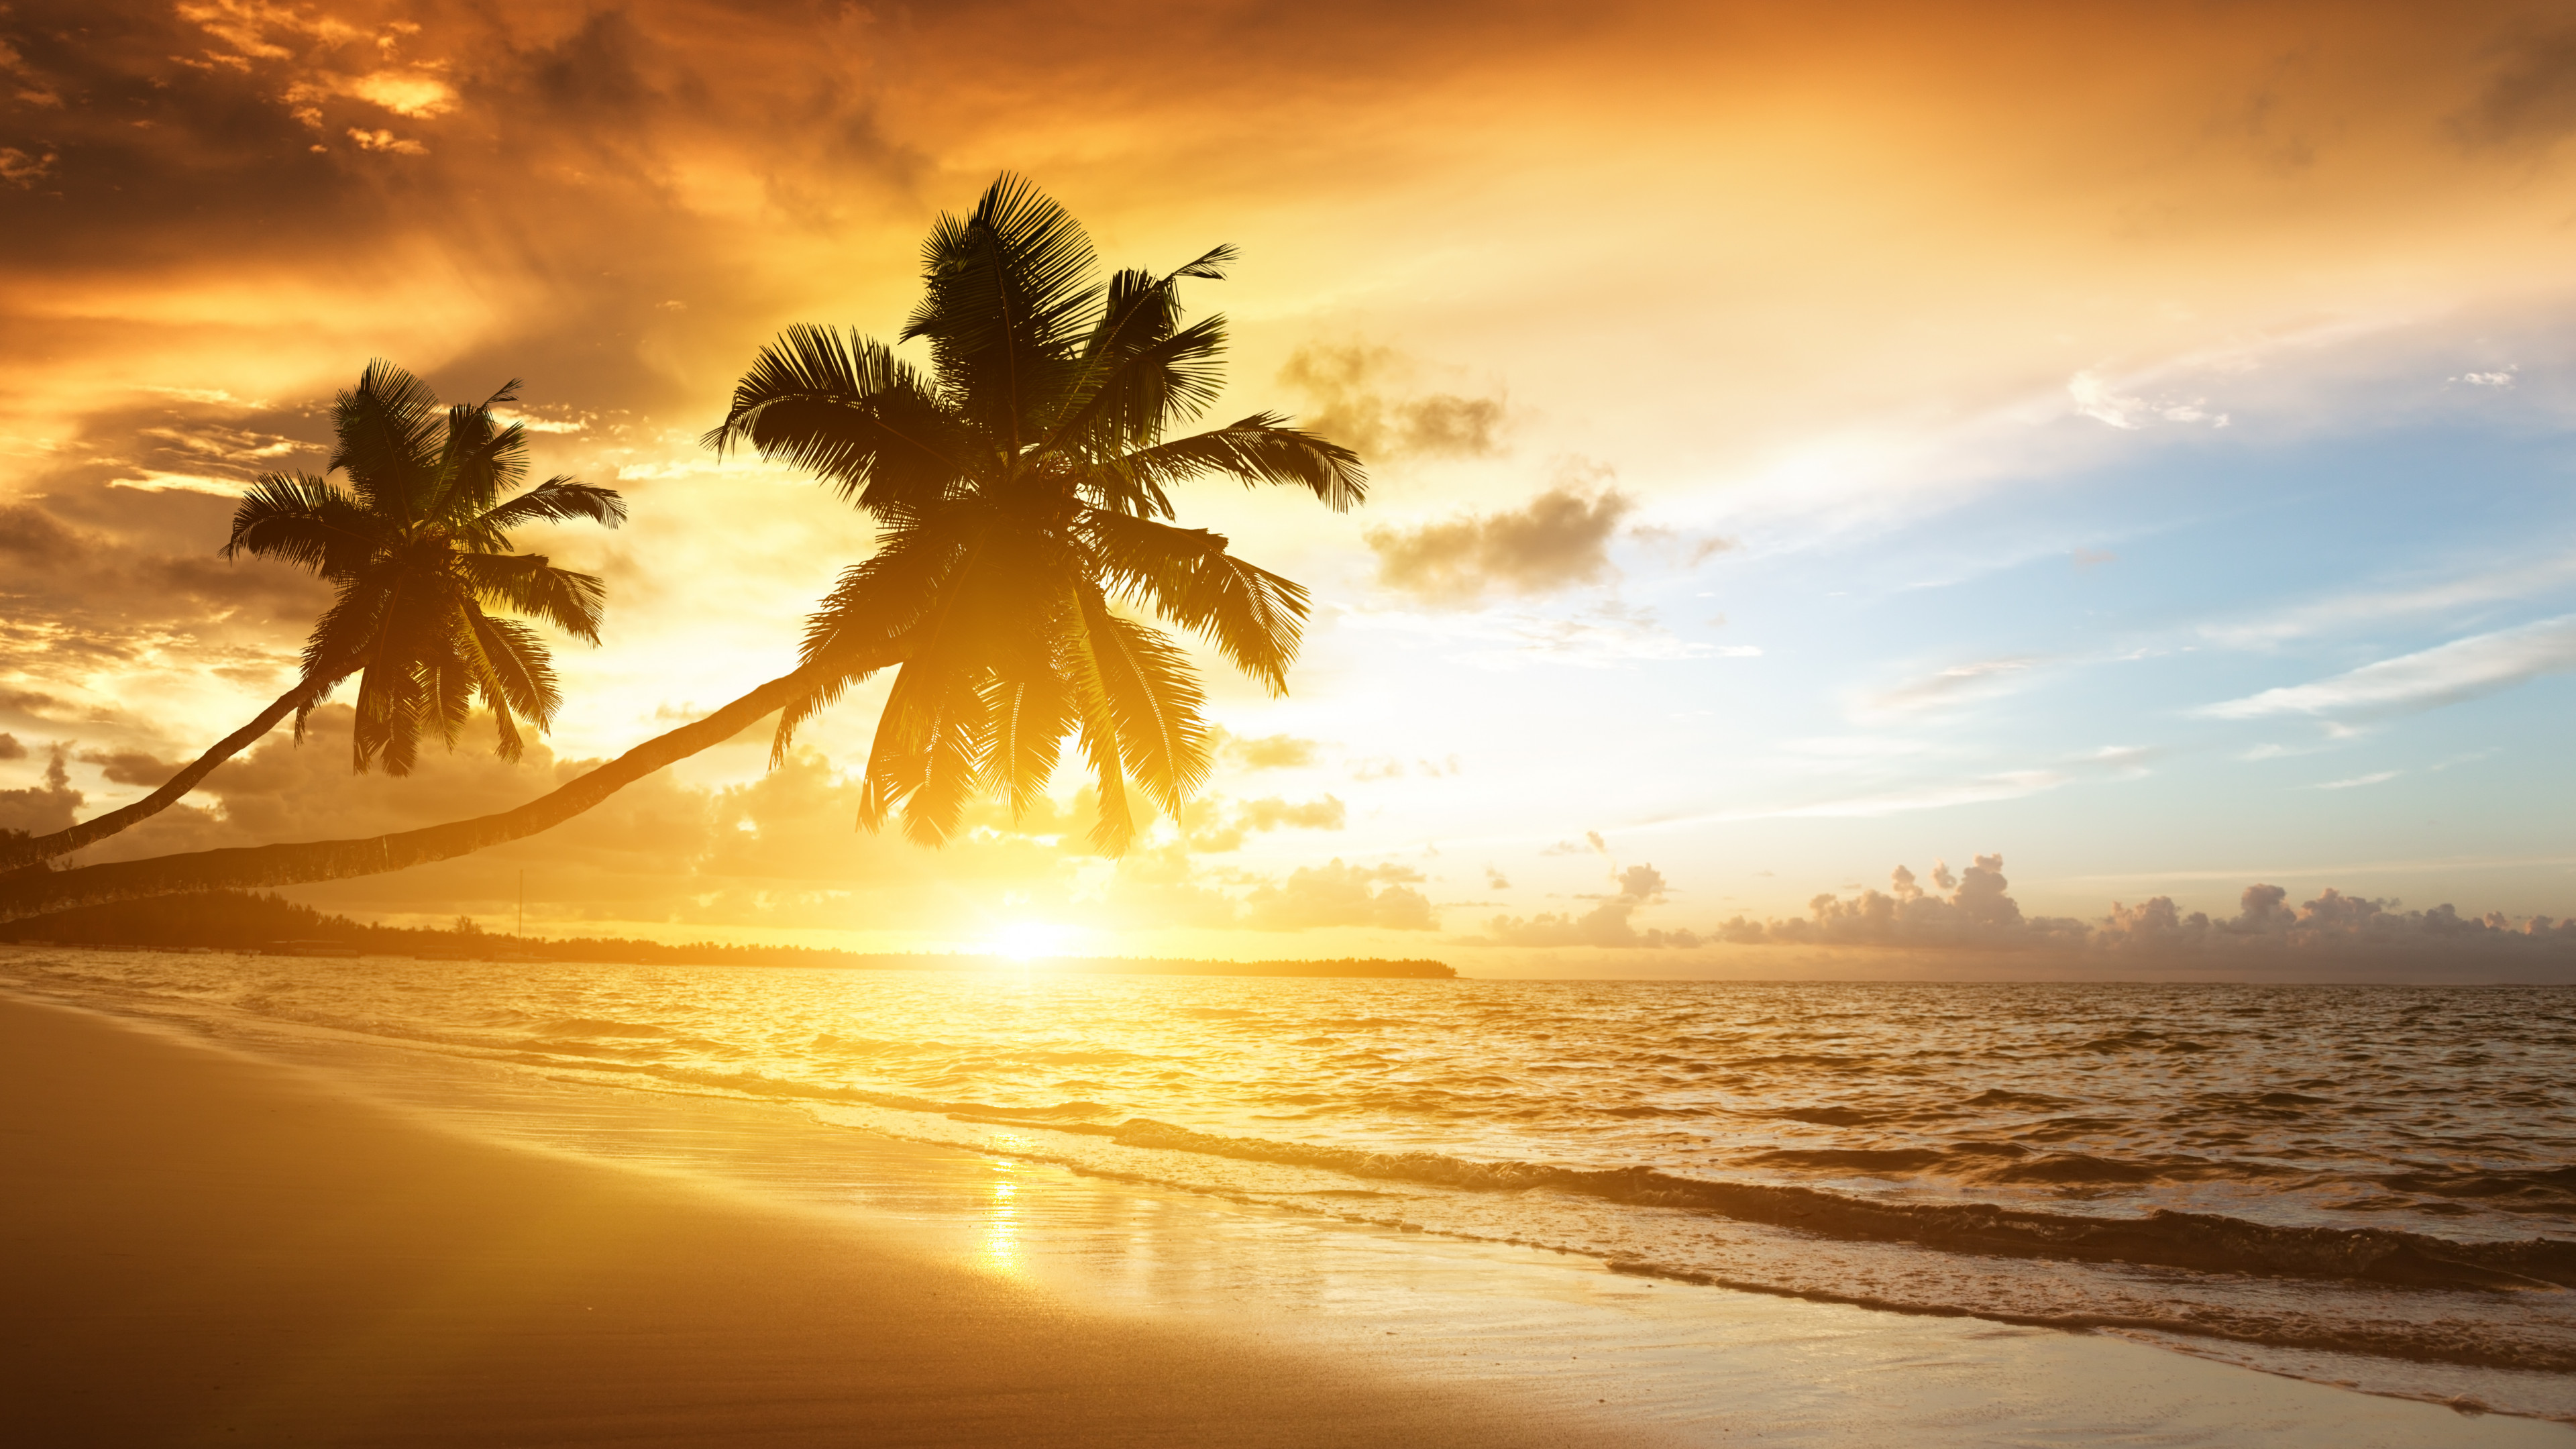 Tropical Beach With Palm Trees At Sunset UHD 4K Wallpaper | Pixelz